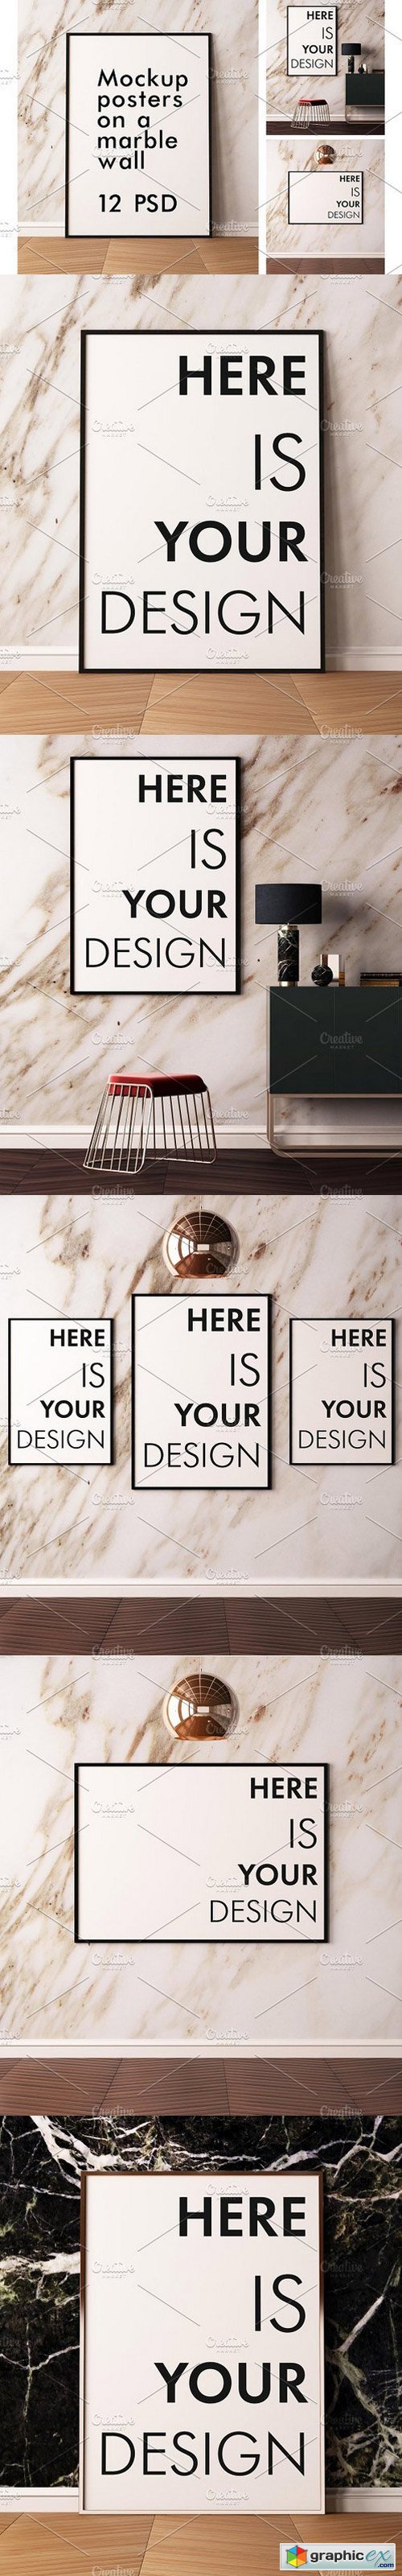 Mockup posters on a marble wall